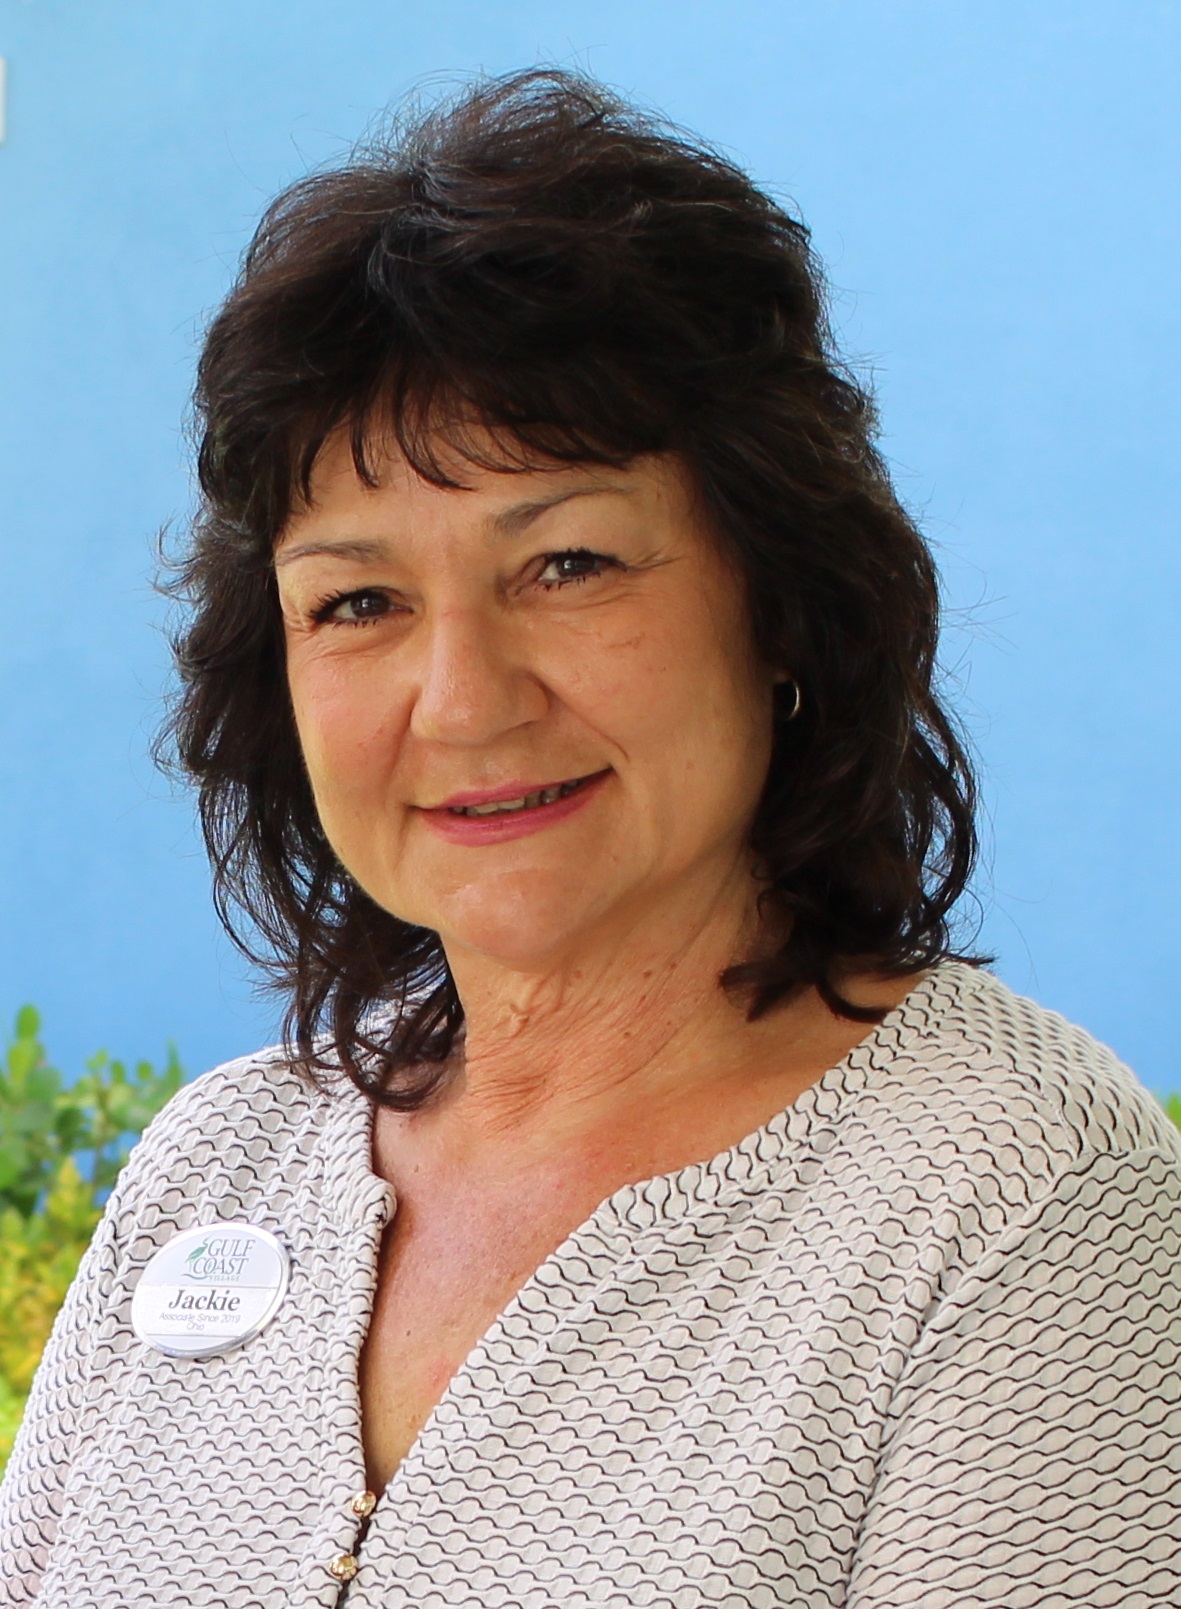 Gulf Coast Village appoints Jackie Fair as administrator  for Palmview assisted living and memory support residences